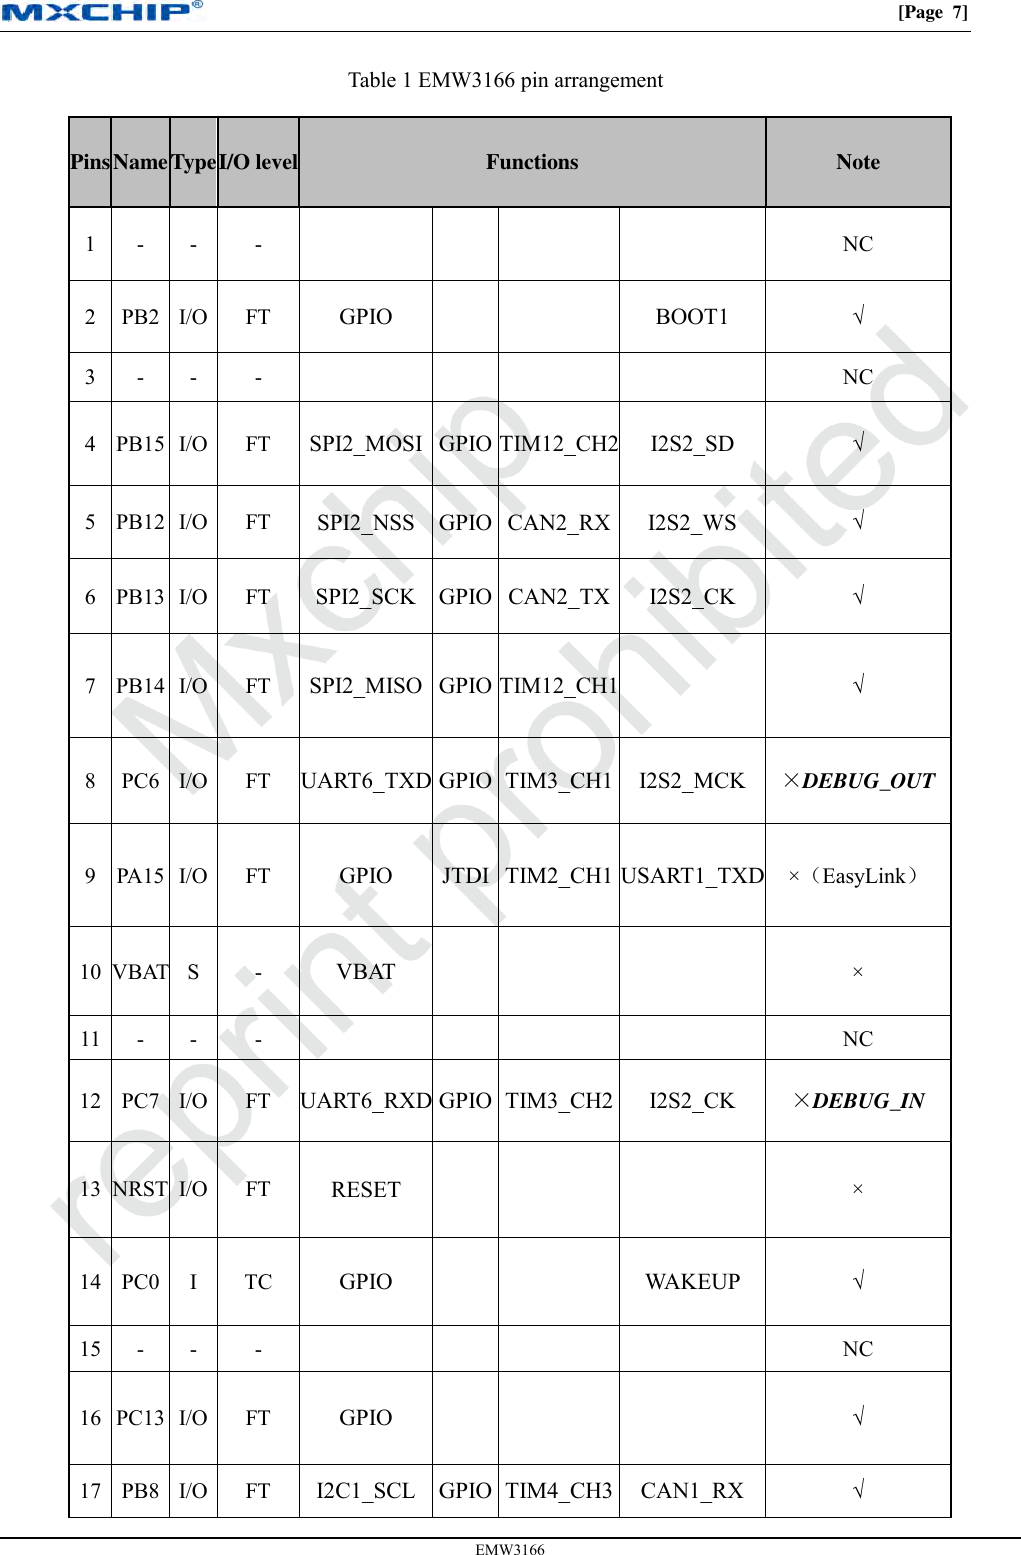 [Page  7] EMW3166 Table 1 EMW3166 pin arrangement Pins Name Type I/O level Functions Note 1 - - - NC 2 PB2 I/O FT GPIO BOOT1 √ 3 - - - NC 4 PB15 I/O FT SPI2_MOSI GPIO TIM12_CH2 I2S2_SD √ 5 PB12 I/O FT SPI2_NSS GPIO CAN2_RX I2S2_WS √ 6 PB13 I/O FT SPI2_SCK  GPIO  CAN2_TX I2S2_CK √ 7 PB14 I/O FT SPI2_MISO  GPIO TIM12_CH1 √ 8 PC6 I/O FT UART6_TXD GPIO  TIM3_CH1 I2S2_MCK ×DEBUG_OUT 9 PA15 I/O FT GPIO JTDI TIM2_CH1 USART1_TXD ×（EasyLink） 10 VBAT S - VBAT × 11 - - - NC 12 PC7 I/O FT UART6_RXD GPIO TIM3_CH2 I2S2_CK ×DEBUG_IN 13 NRST I/O FT RESET × 14 PC0 I TC GPIO WAKEUP √ 15 - - - NC 16 PC13 I/O FT GPIO √ 17 PB8 I/O FT I2C1_SCL GPIO TIM4_CH3 CAN1_RX √